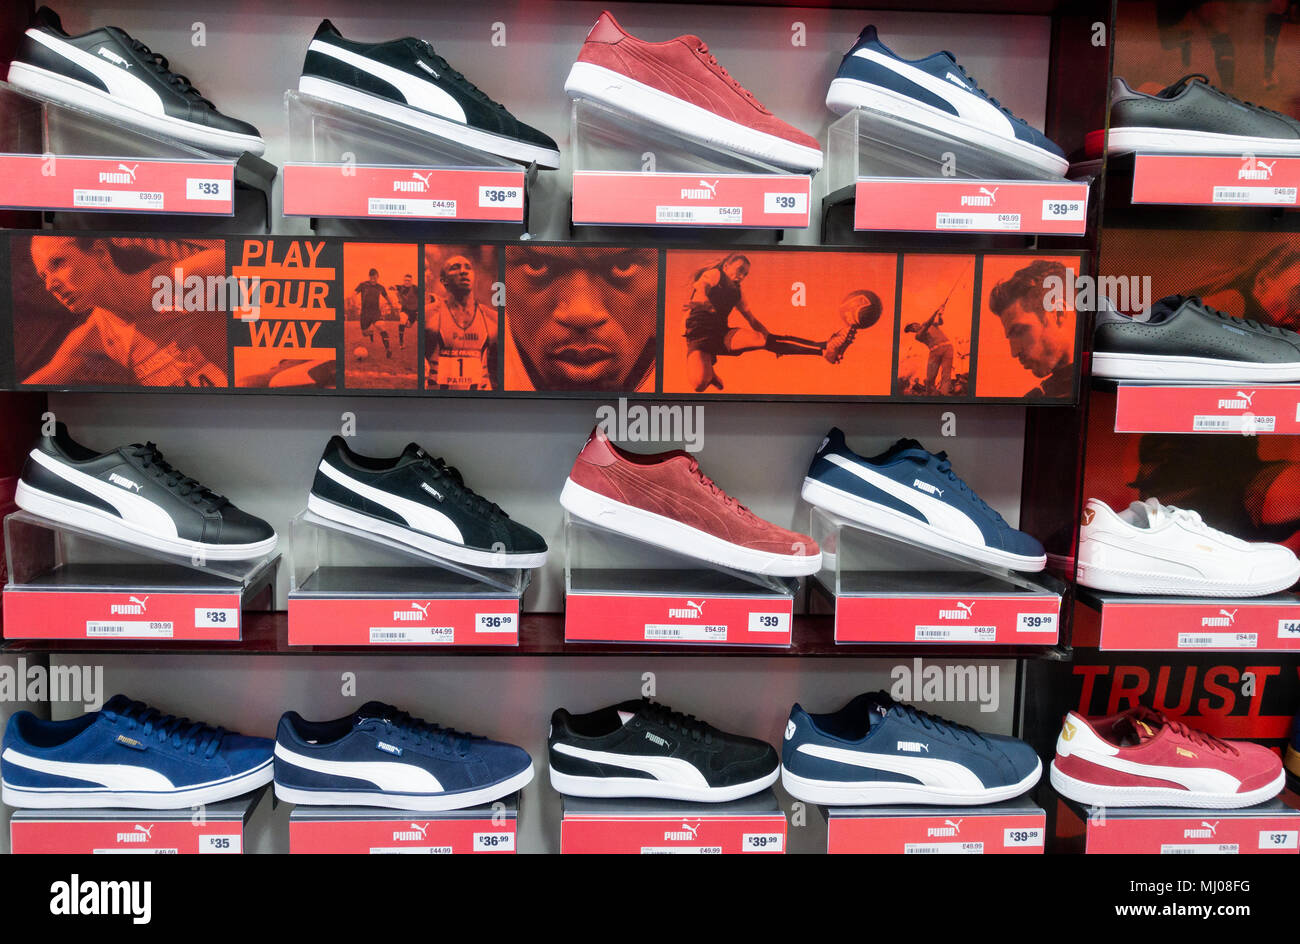 Religious Elementary school repose Puma training shoes in Sports Direct store. UK Stock Photo - Alamy